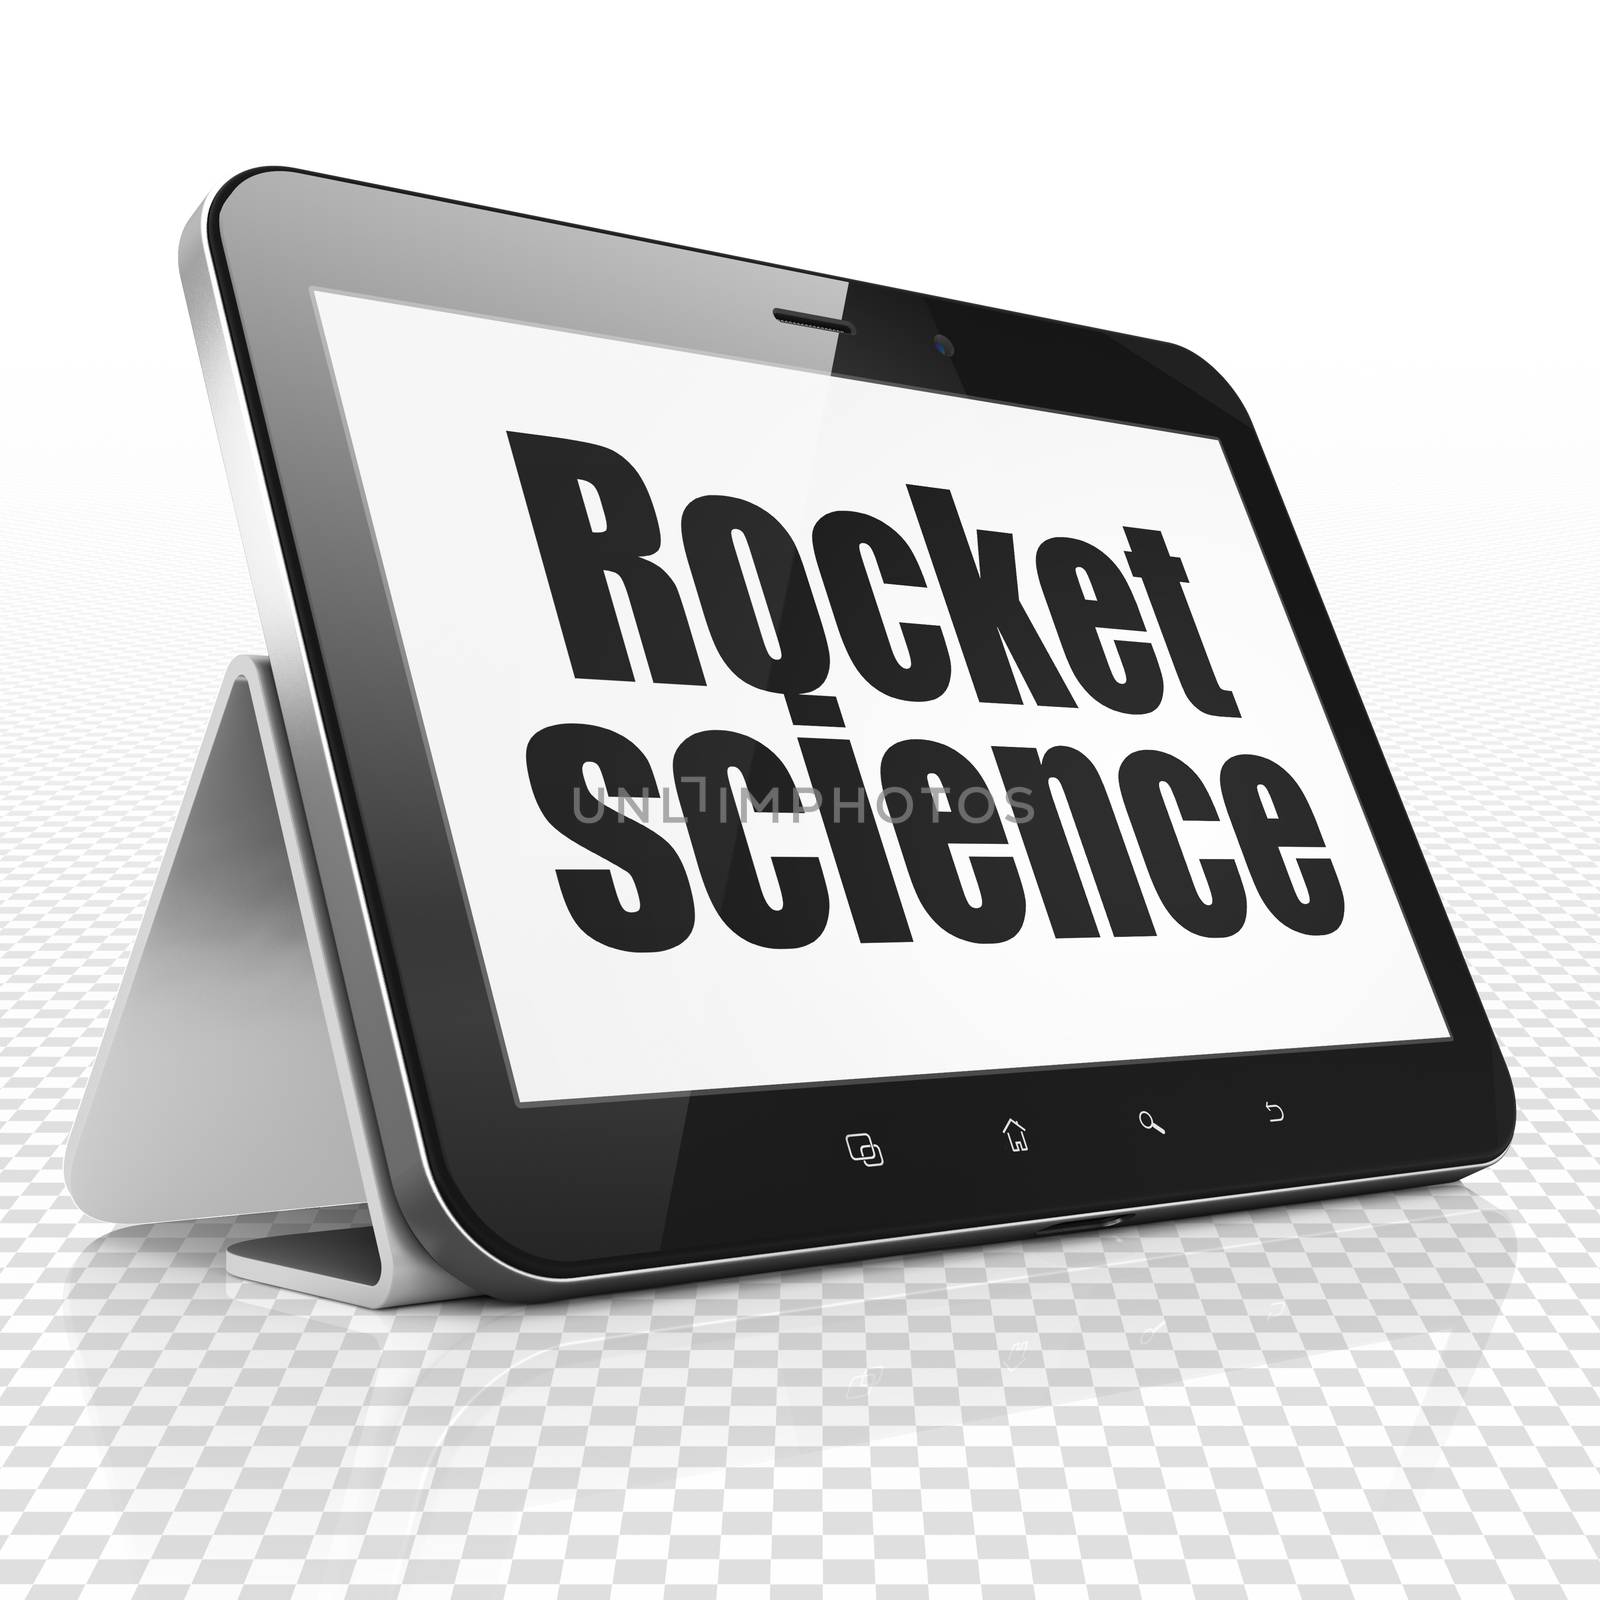 Science concept: Tablet Computer with Rocket Science on display by maxkabakov